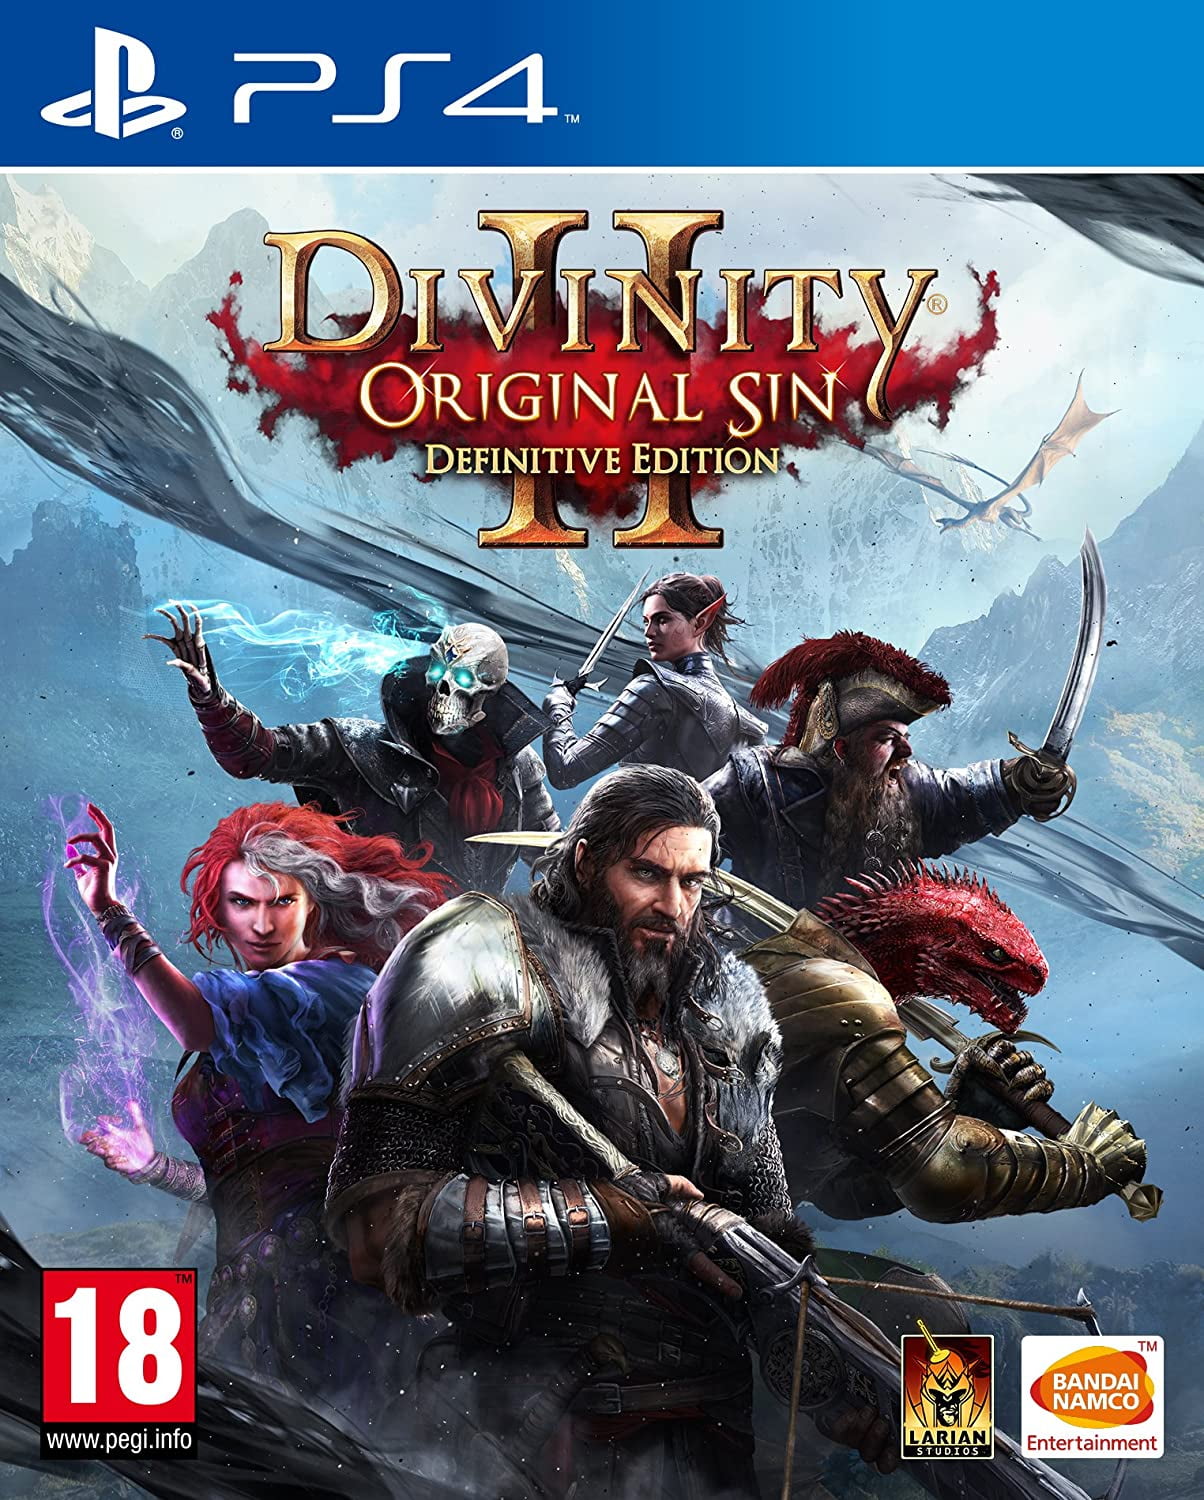 Divinity Original Sin 2 Definitive Edition (PS4 Playstation 4) The Divine is Dead. Only You Can Save the World